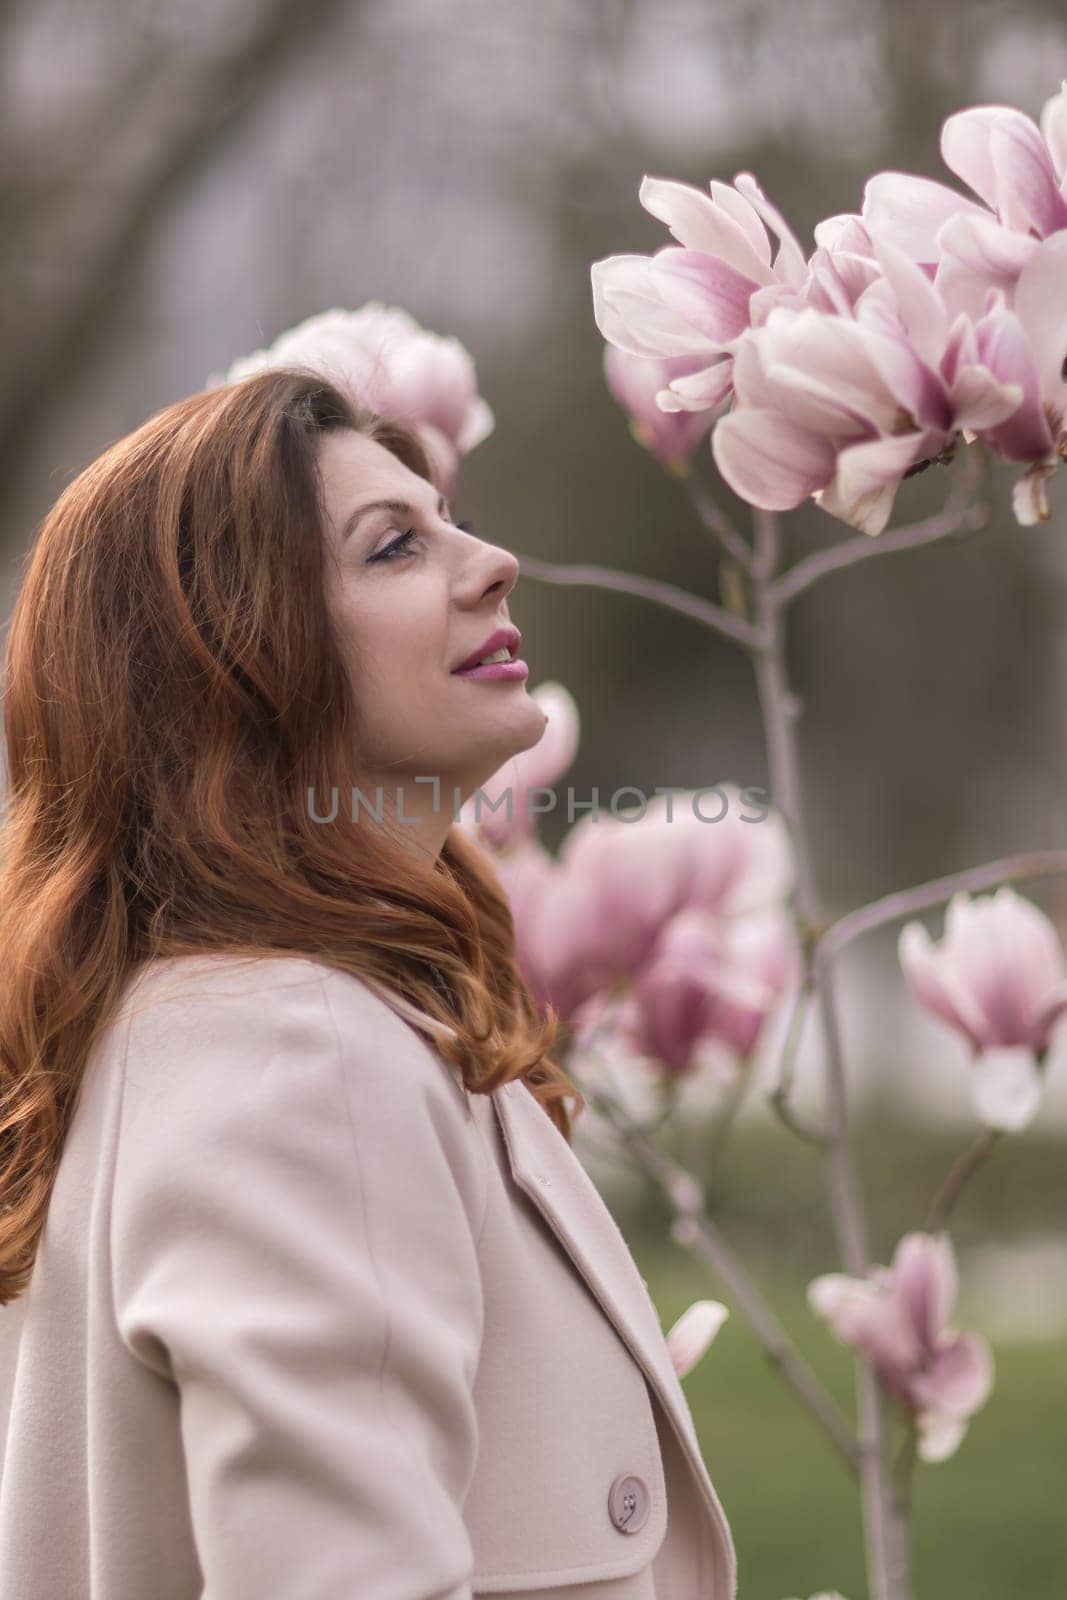 Woman magnolia flowers, surrounded by blossoming trees., hair down, wearing a light coat. Captured during spring, showcasing natural beauty and seasonal change. by Matiunina